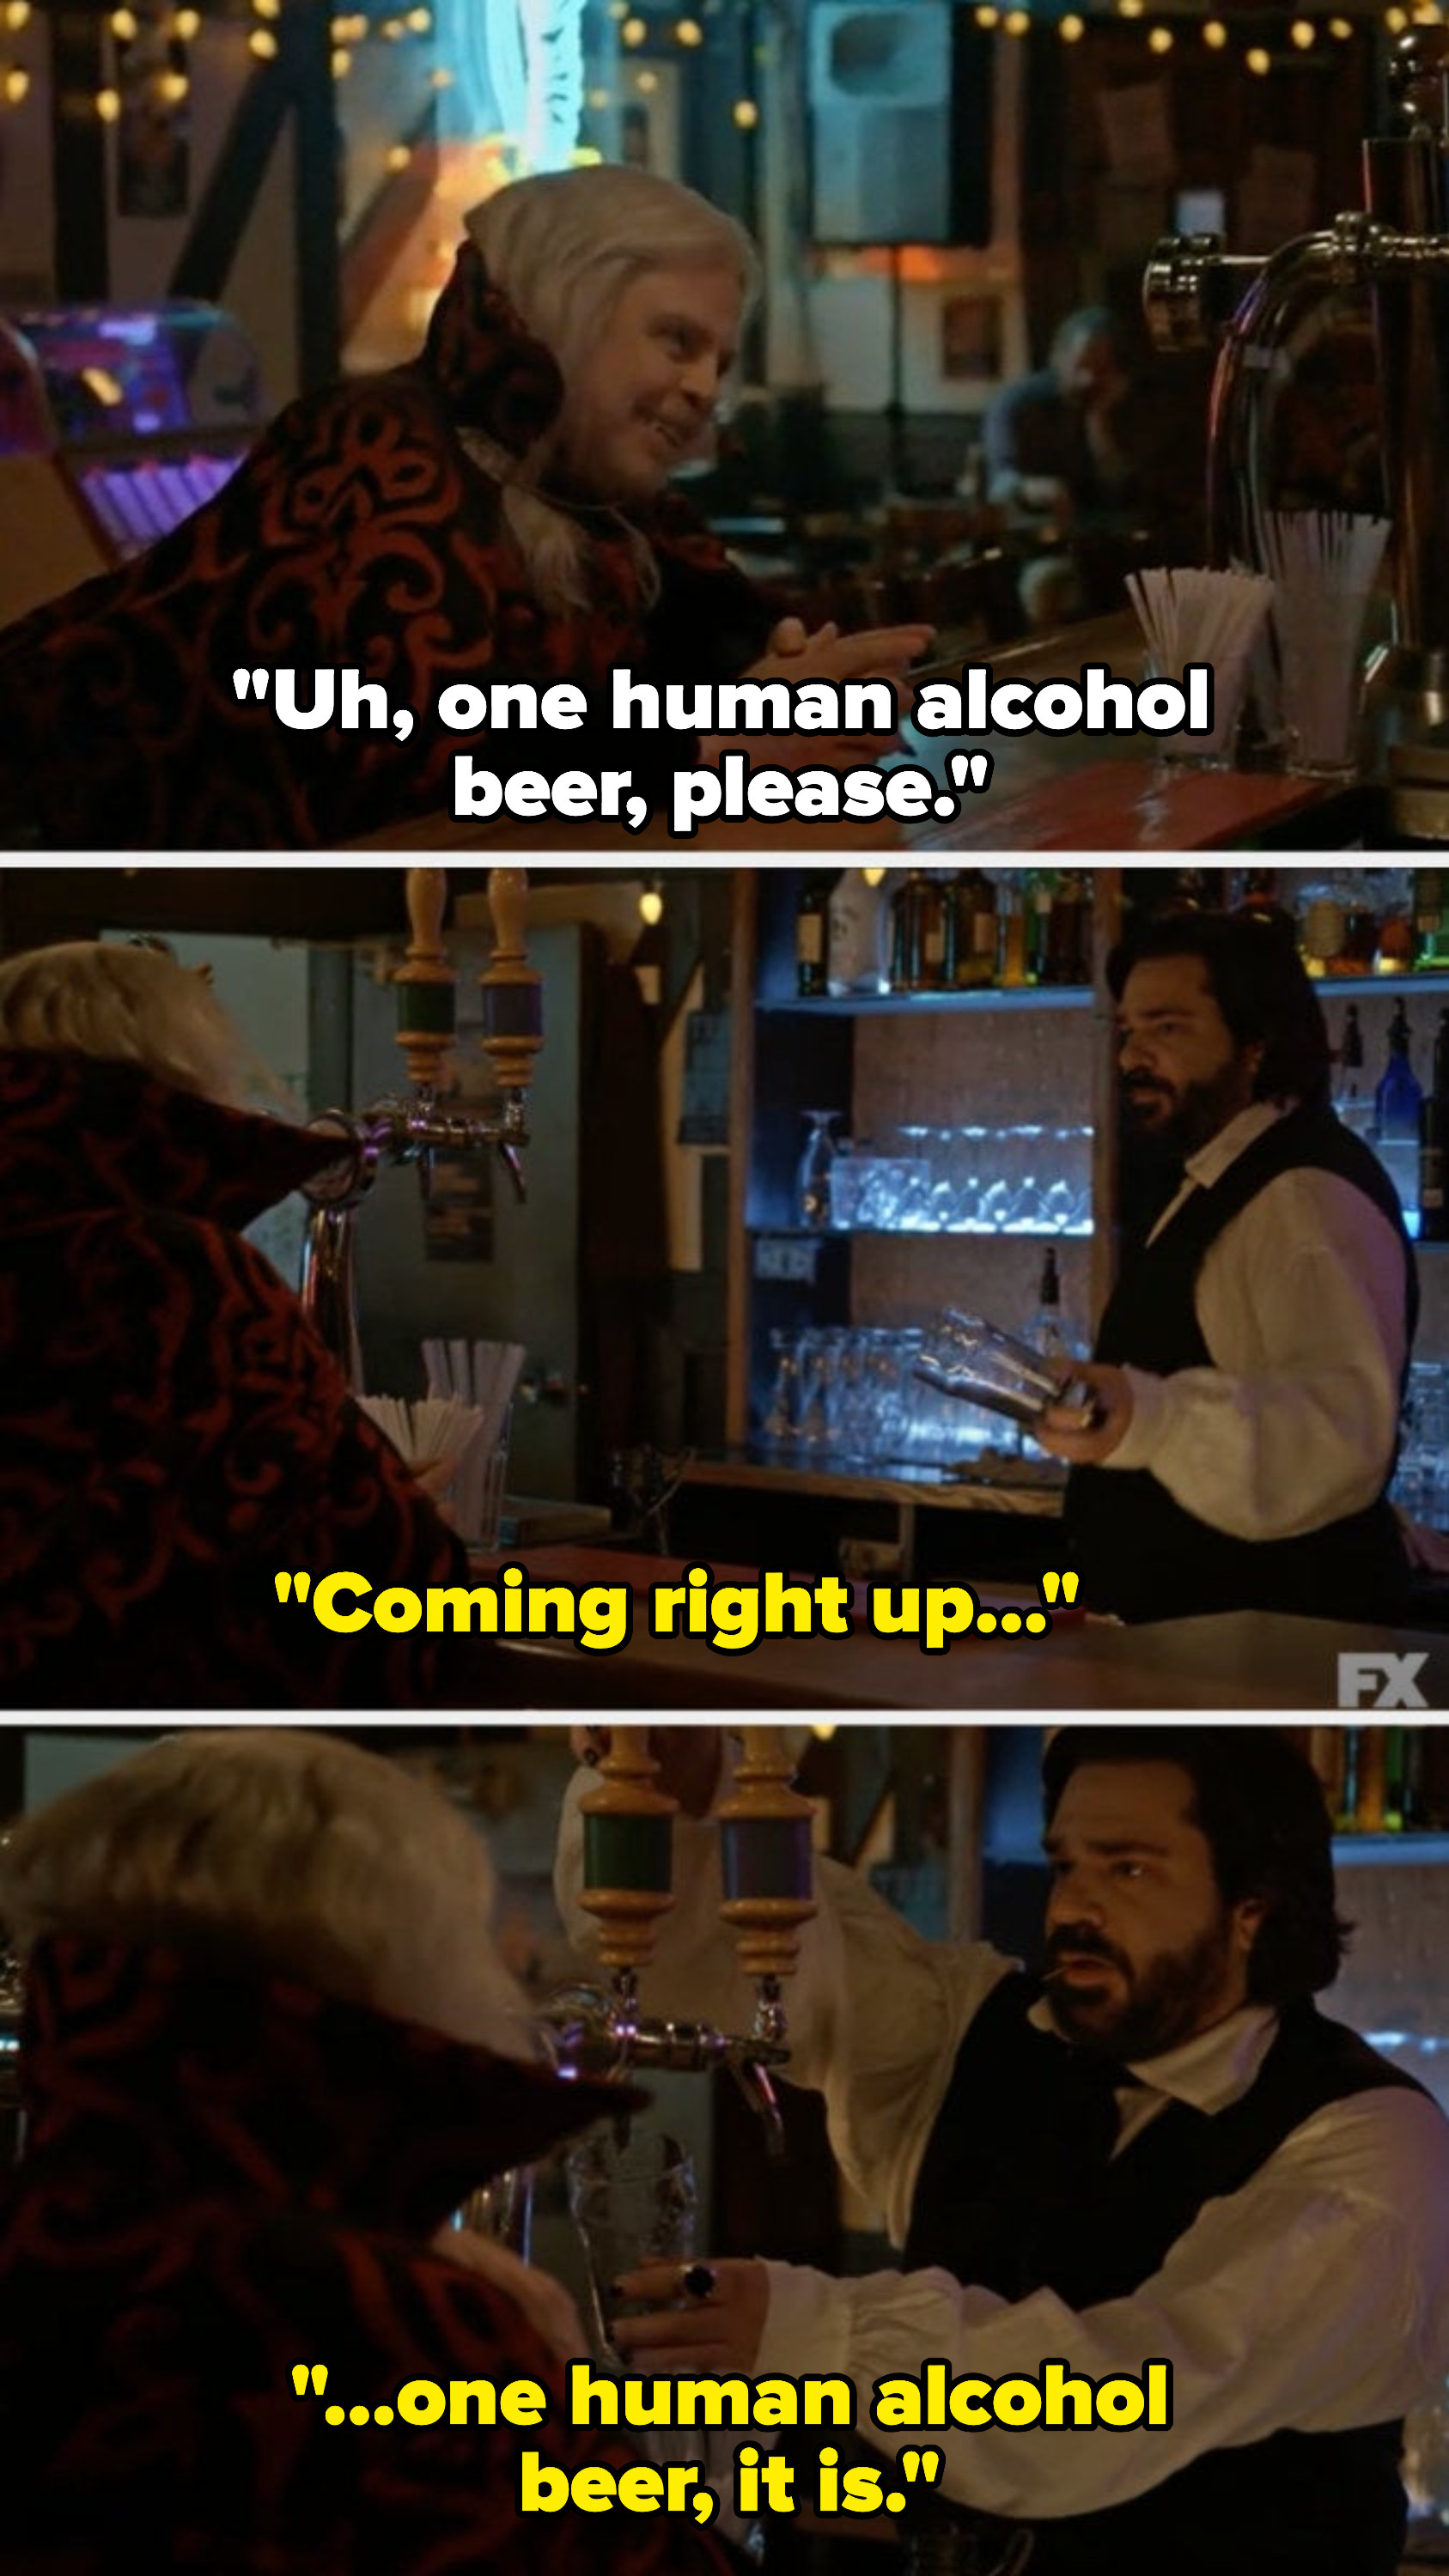 Character asking a bartender for &quot;one human alcohol beer&quot;